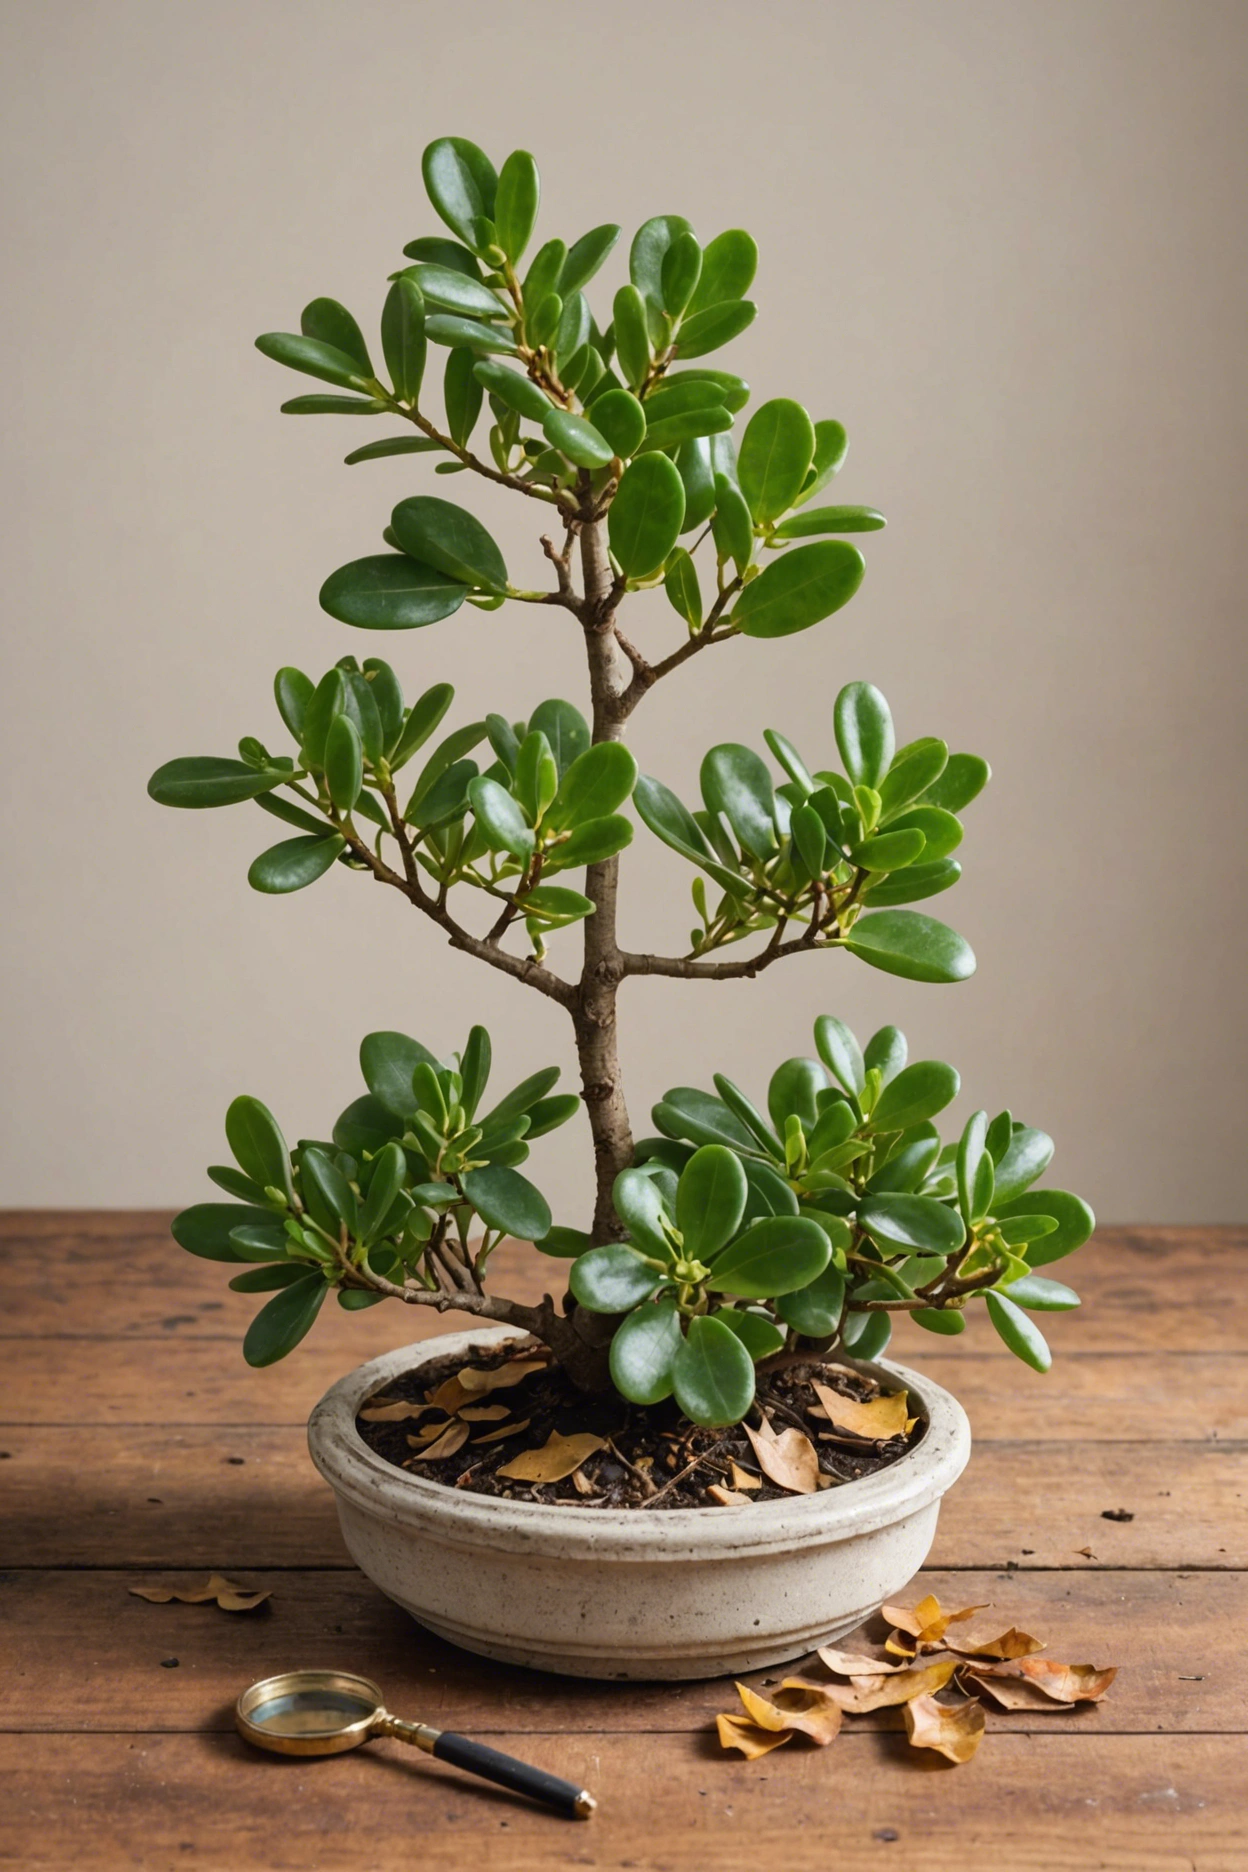 "Distressed jade plant with drooping branches and yellowing leaves on a wooden table, magnifying glass nearby."